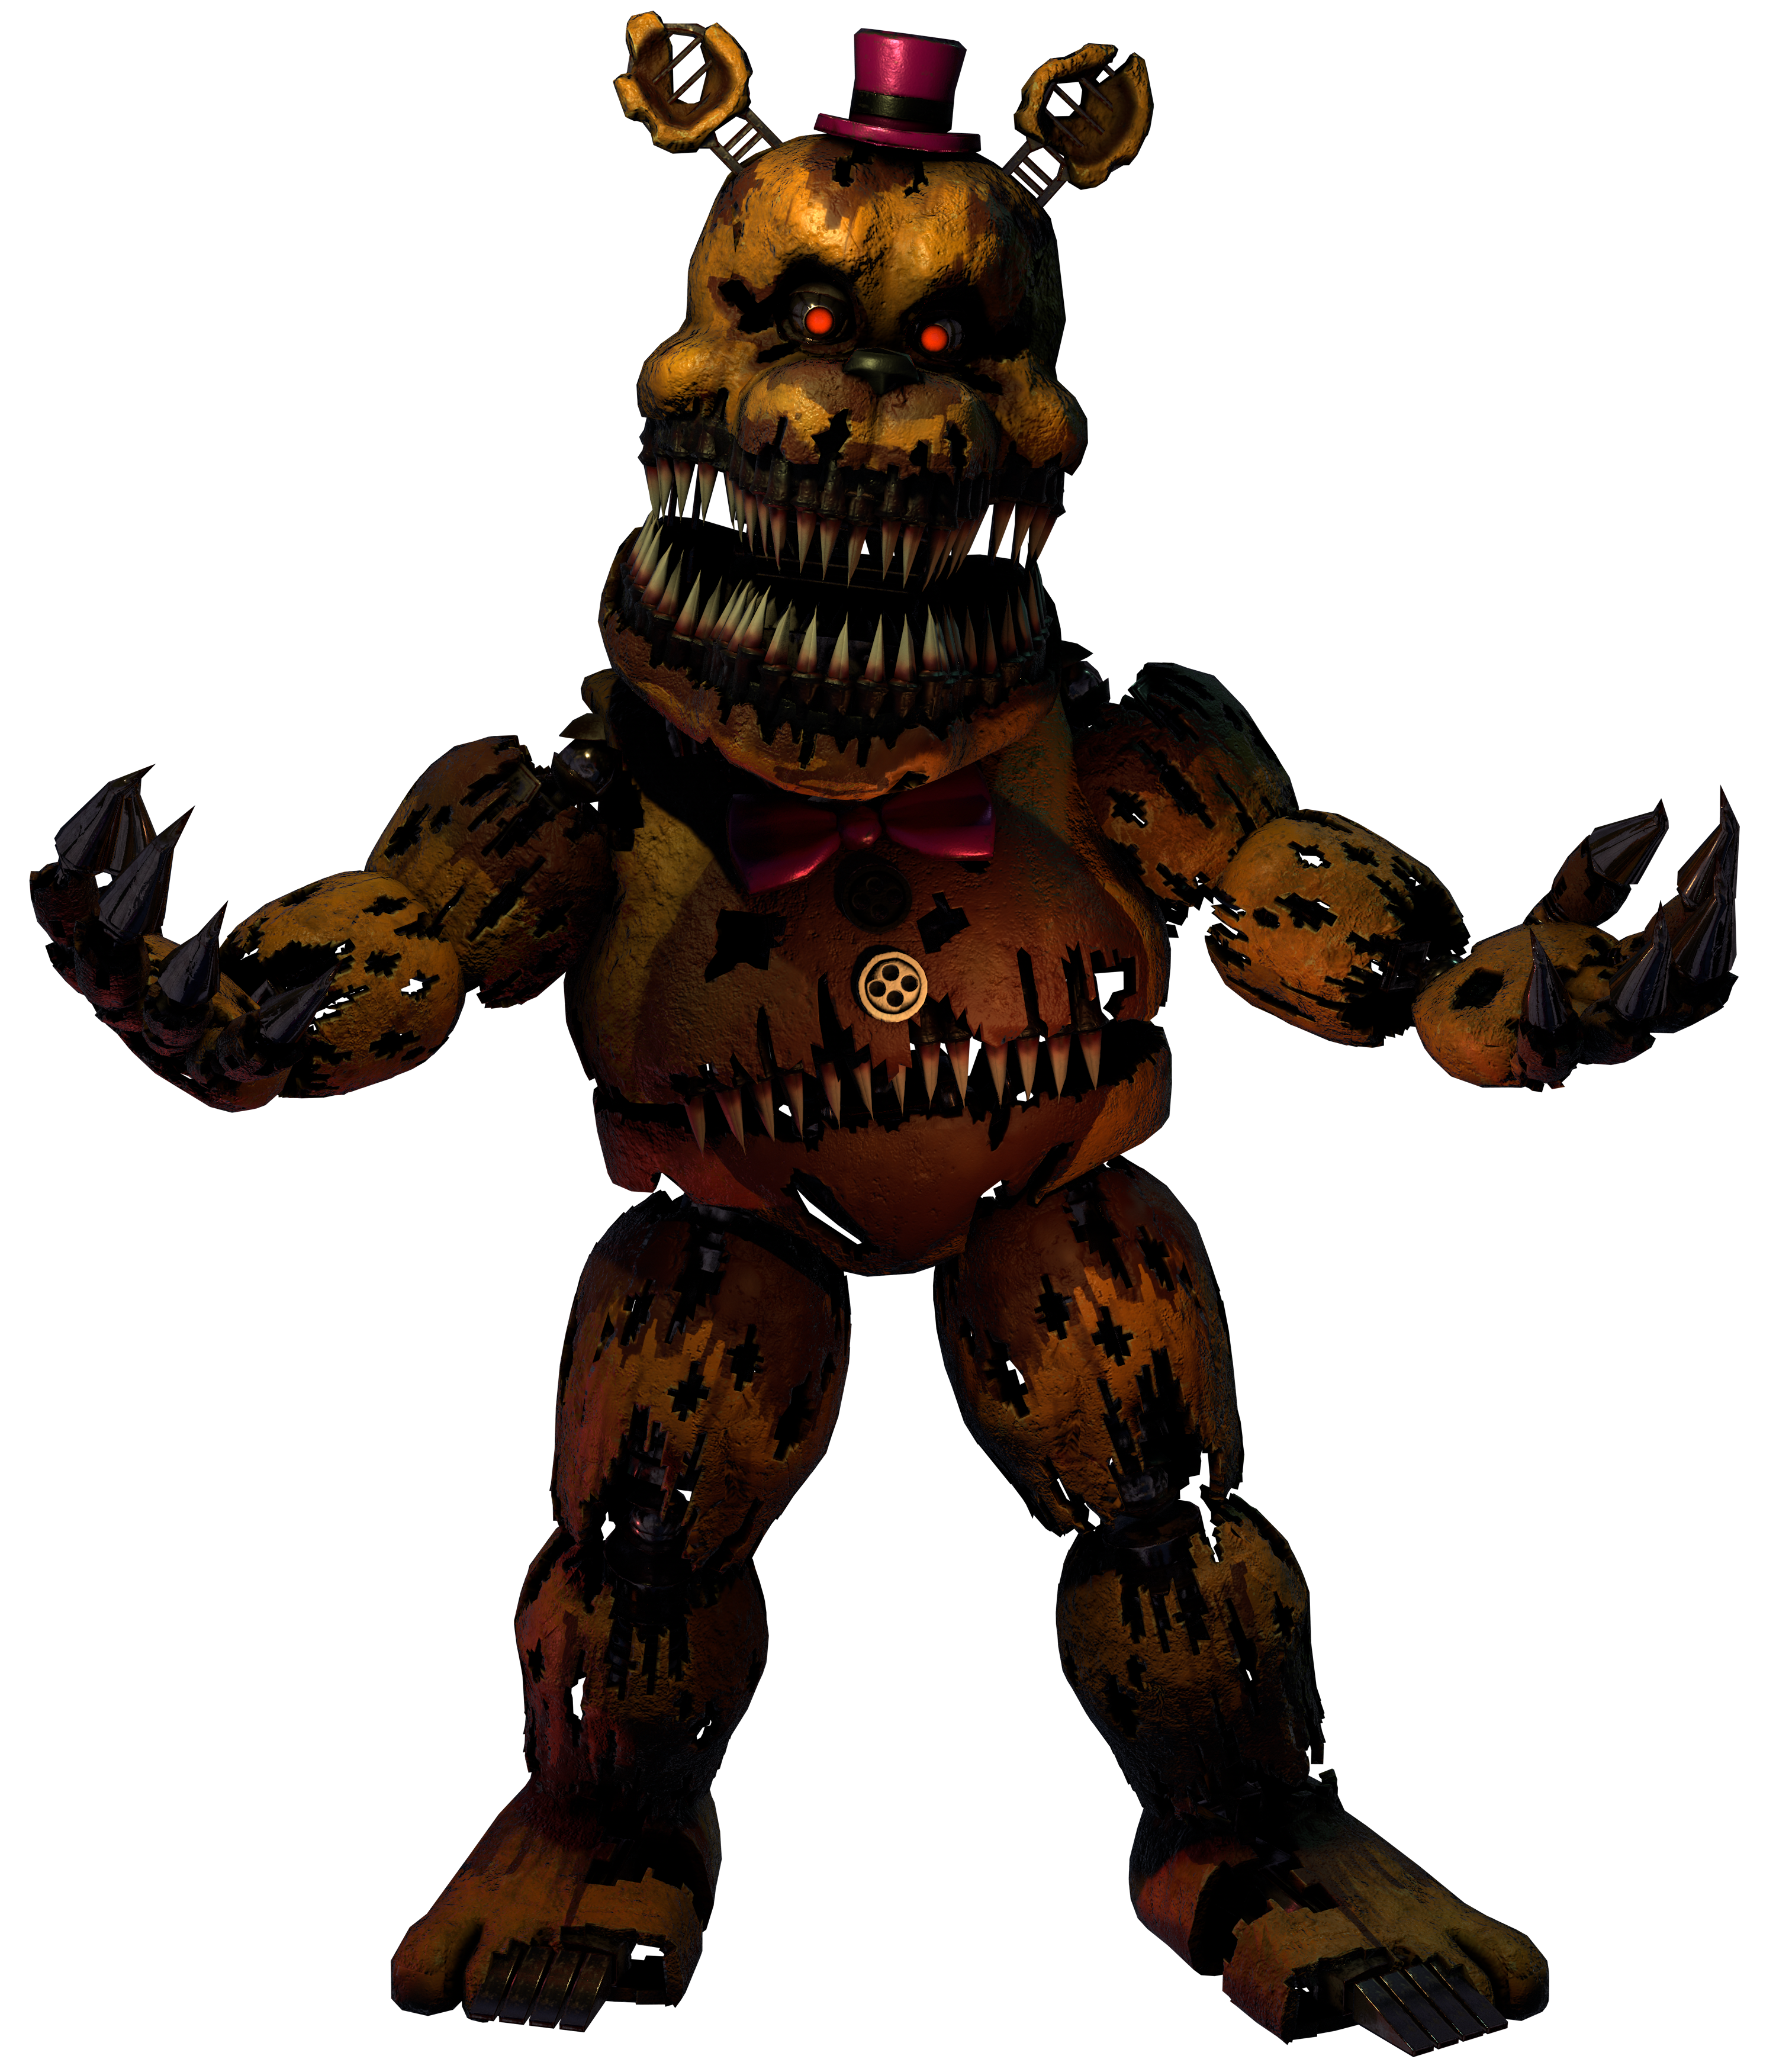 Five Nights at Freddy's is an animatronic nightmare in new trailer